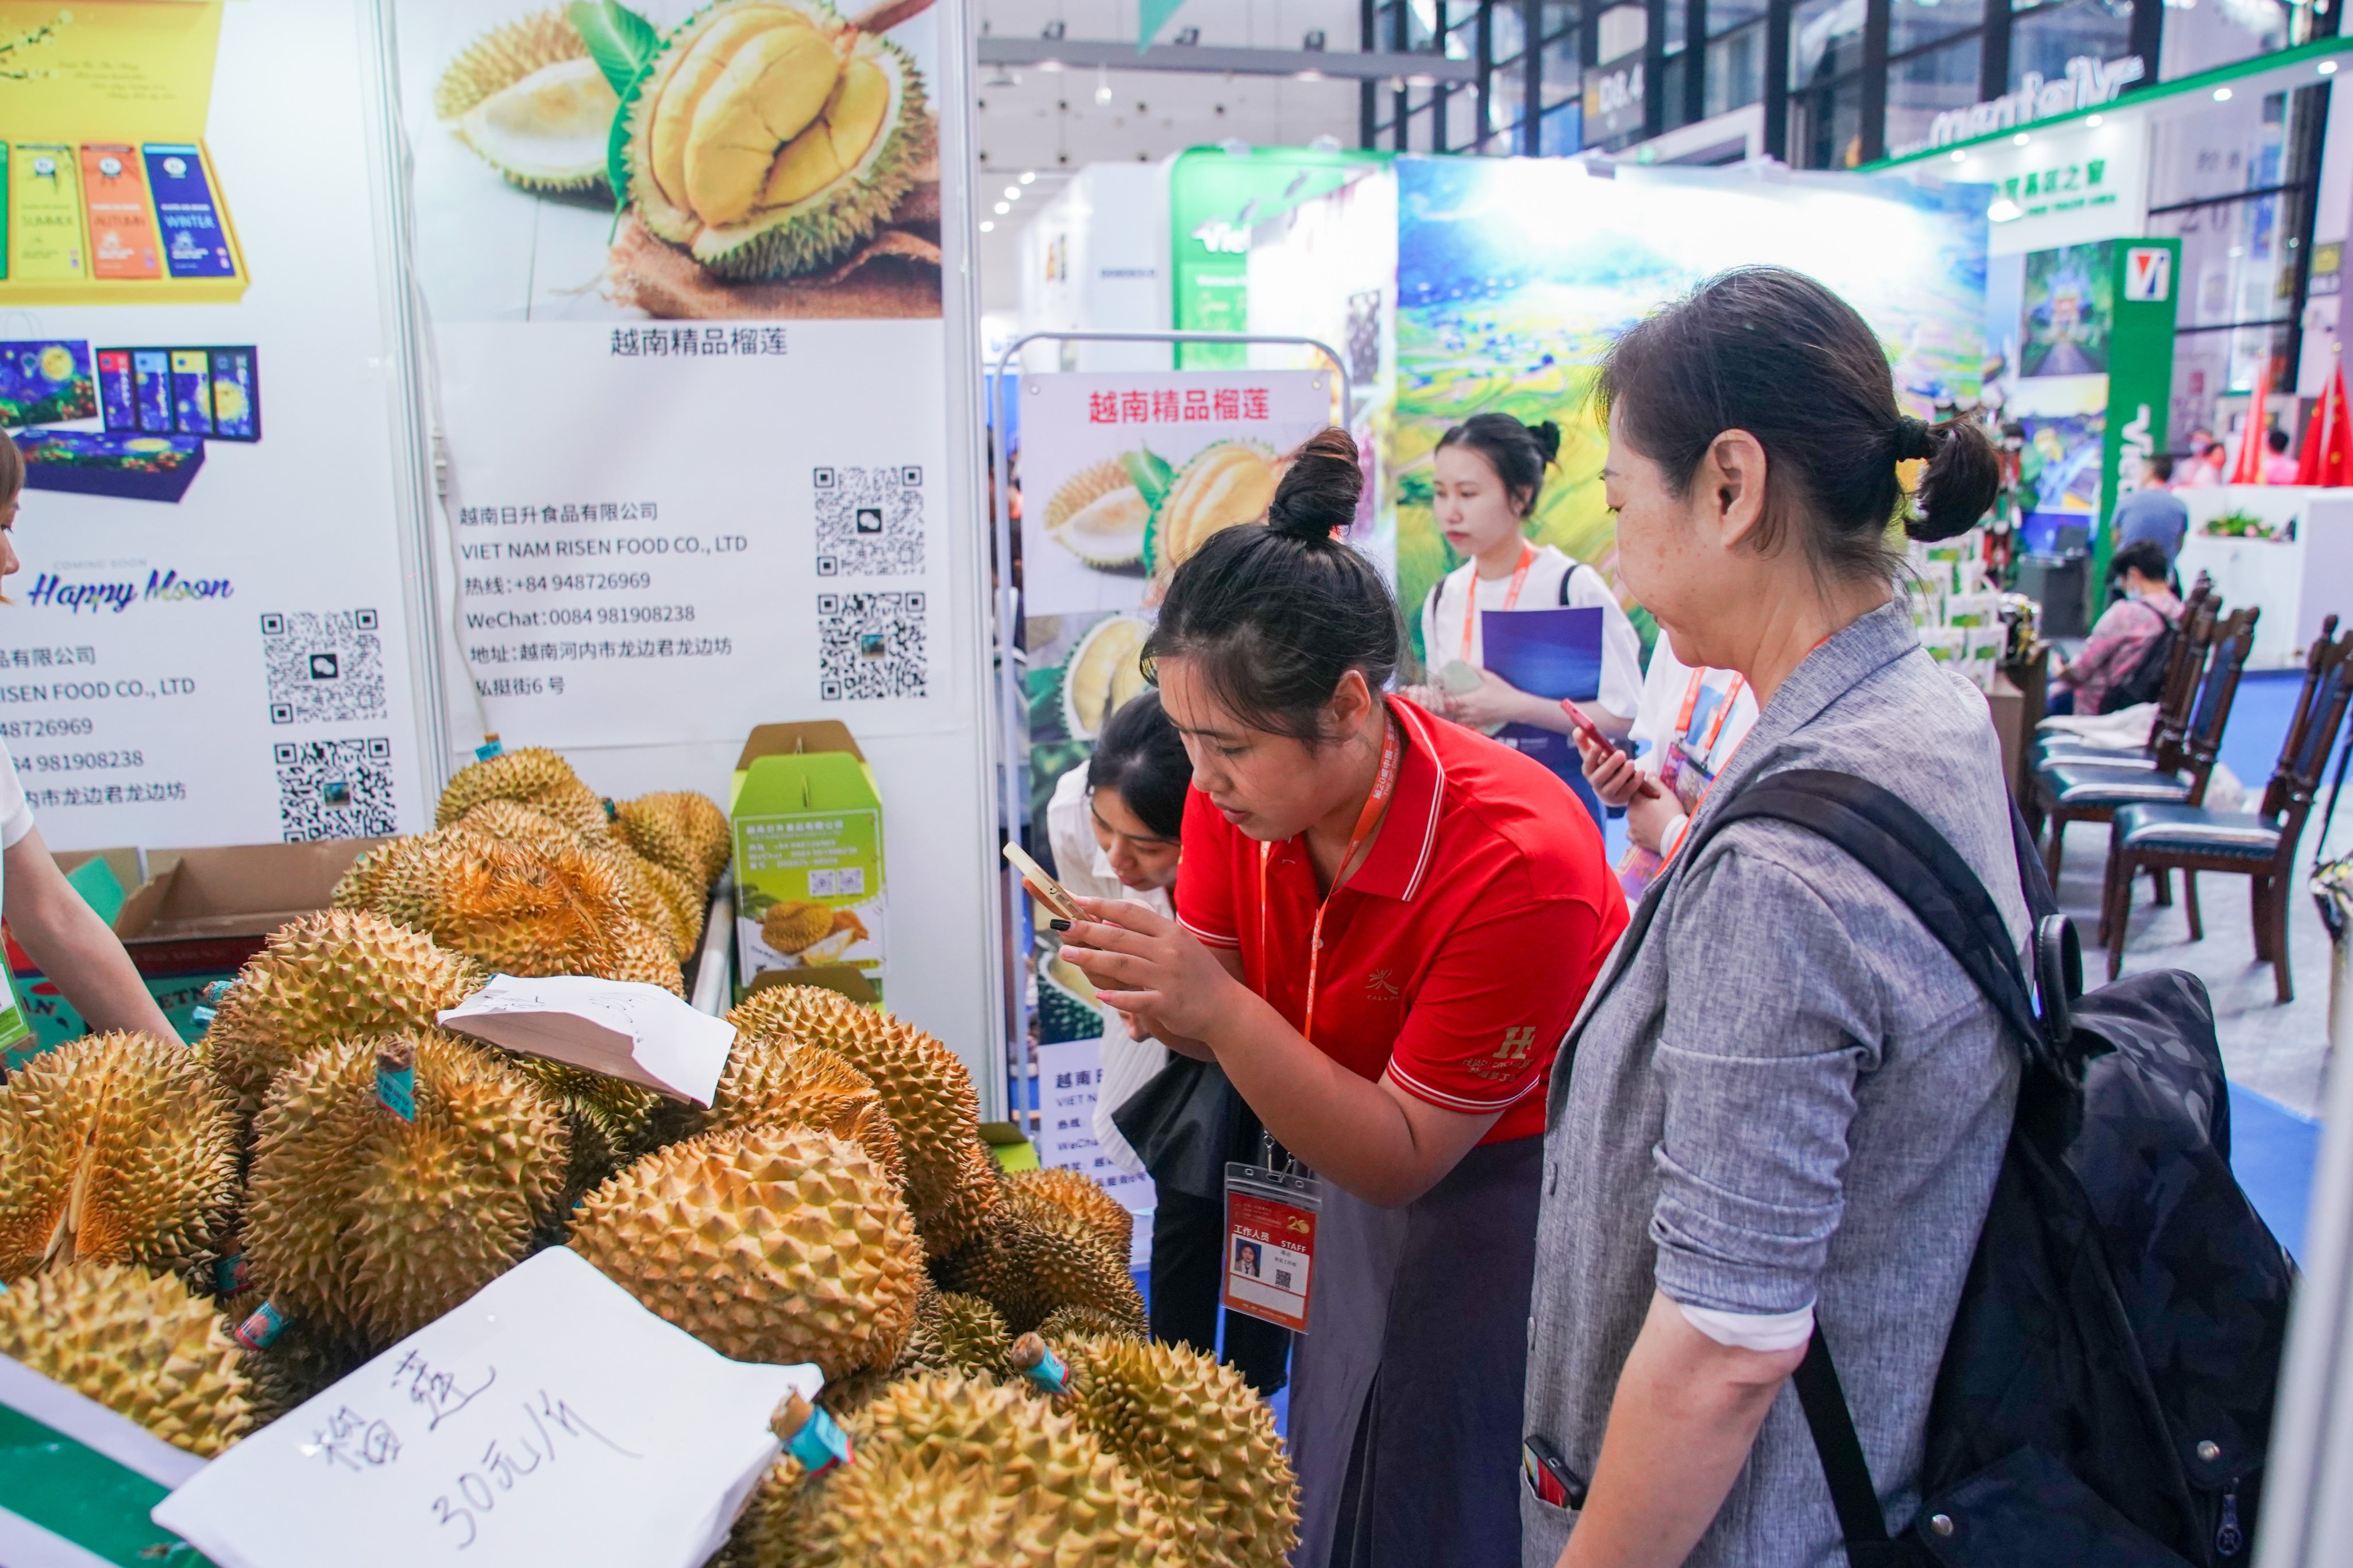 Photos are taken at a Vietnamese durian booth during a trade show in China last year, when imports of the Southeast Asian fruit soared to record levels. Photo: Getty Images